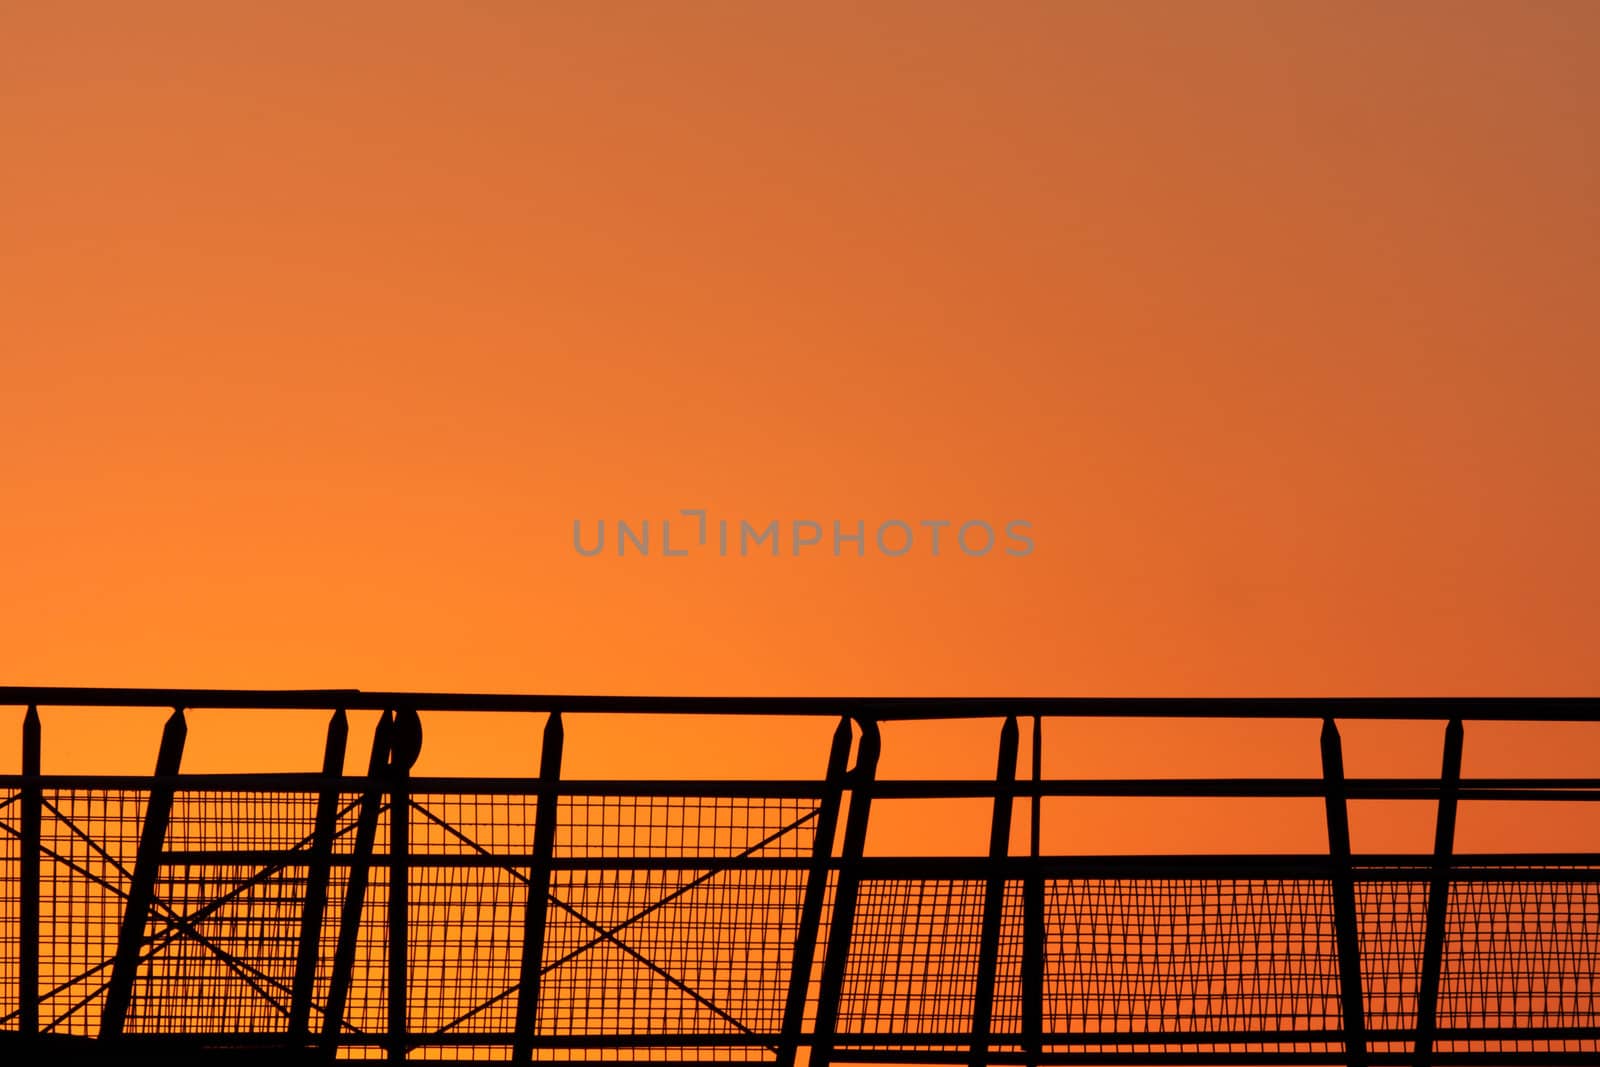 Bright sunrise with a metal railing in the foreground in silhouette